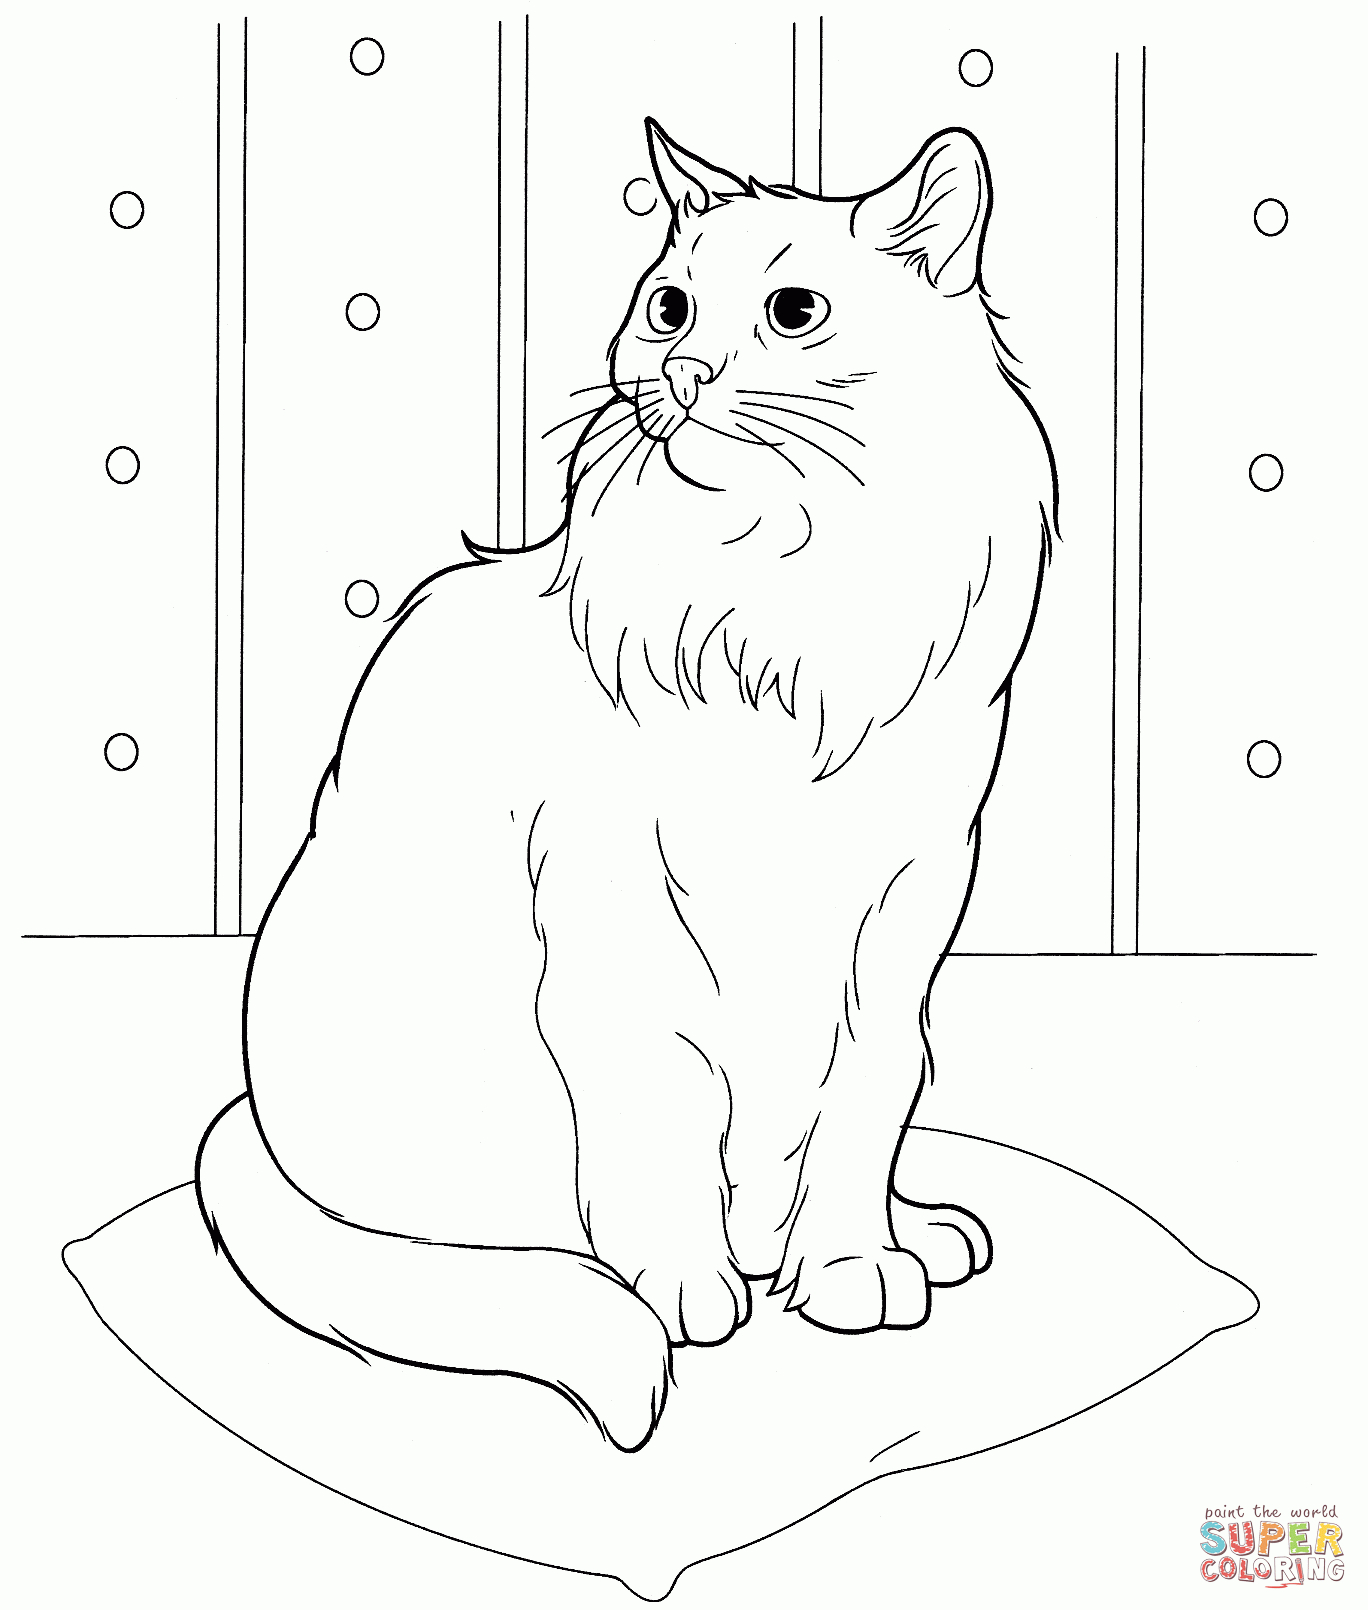 Siberian Cat Coloring Page | Free Printable Coloring Pages - Cat Coloring Pages Free Printable